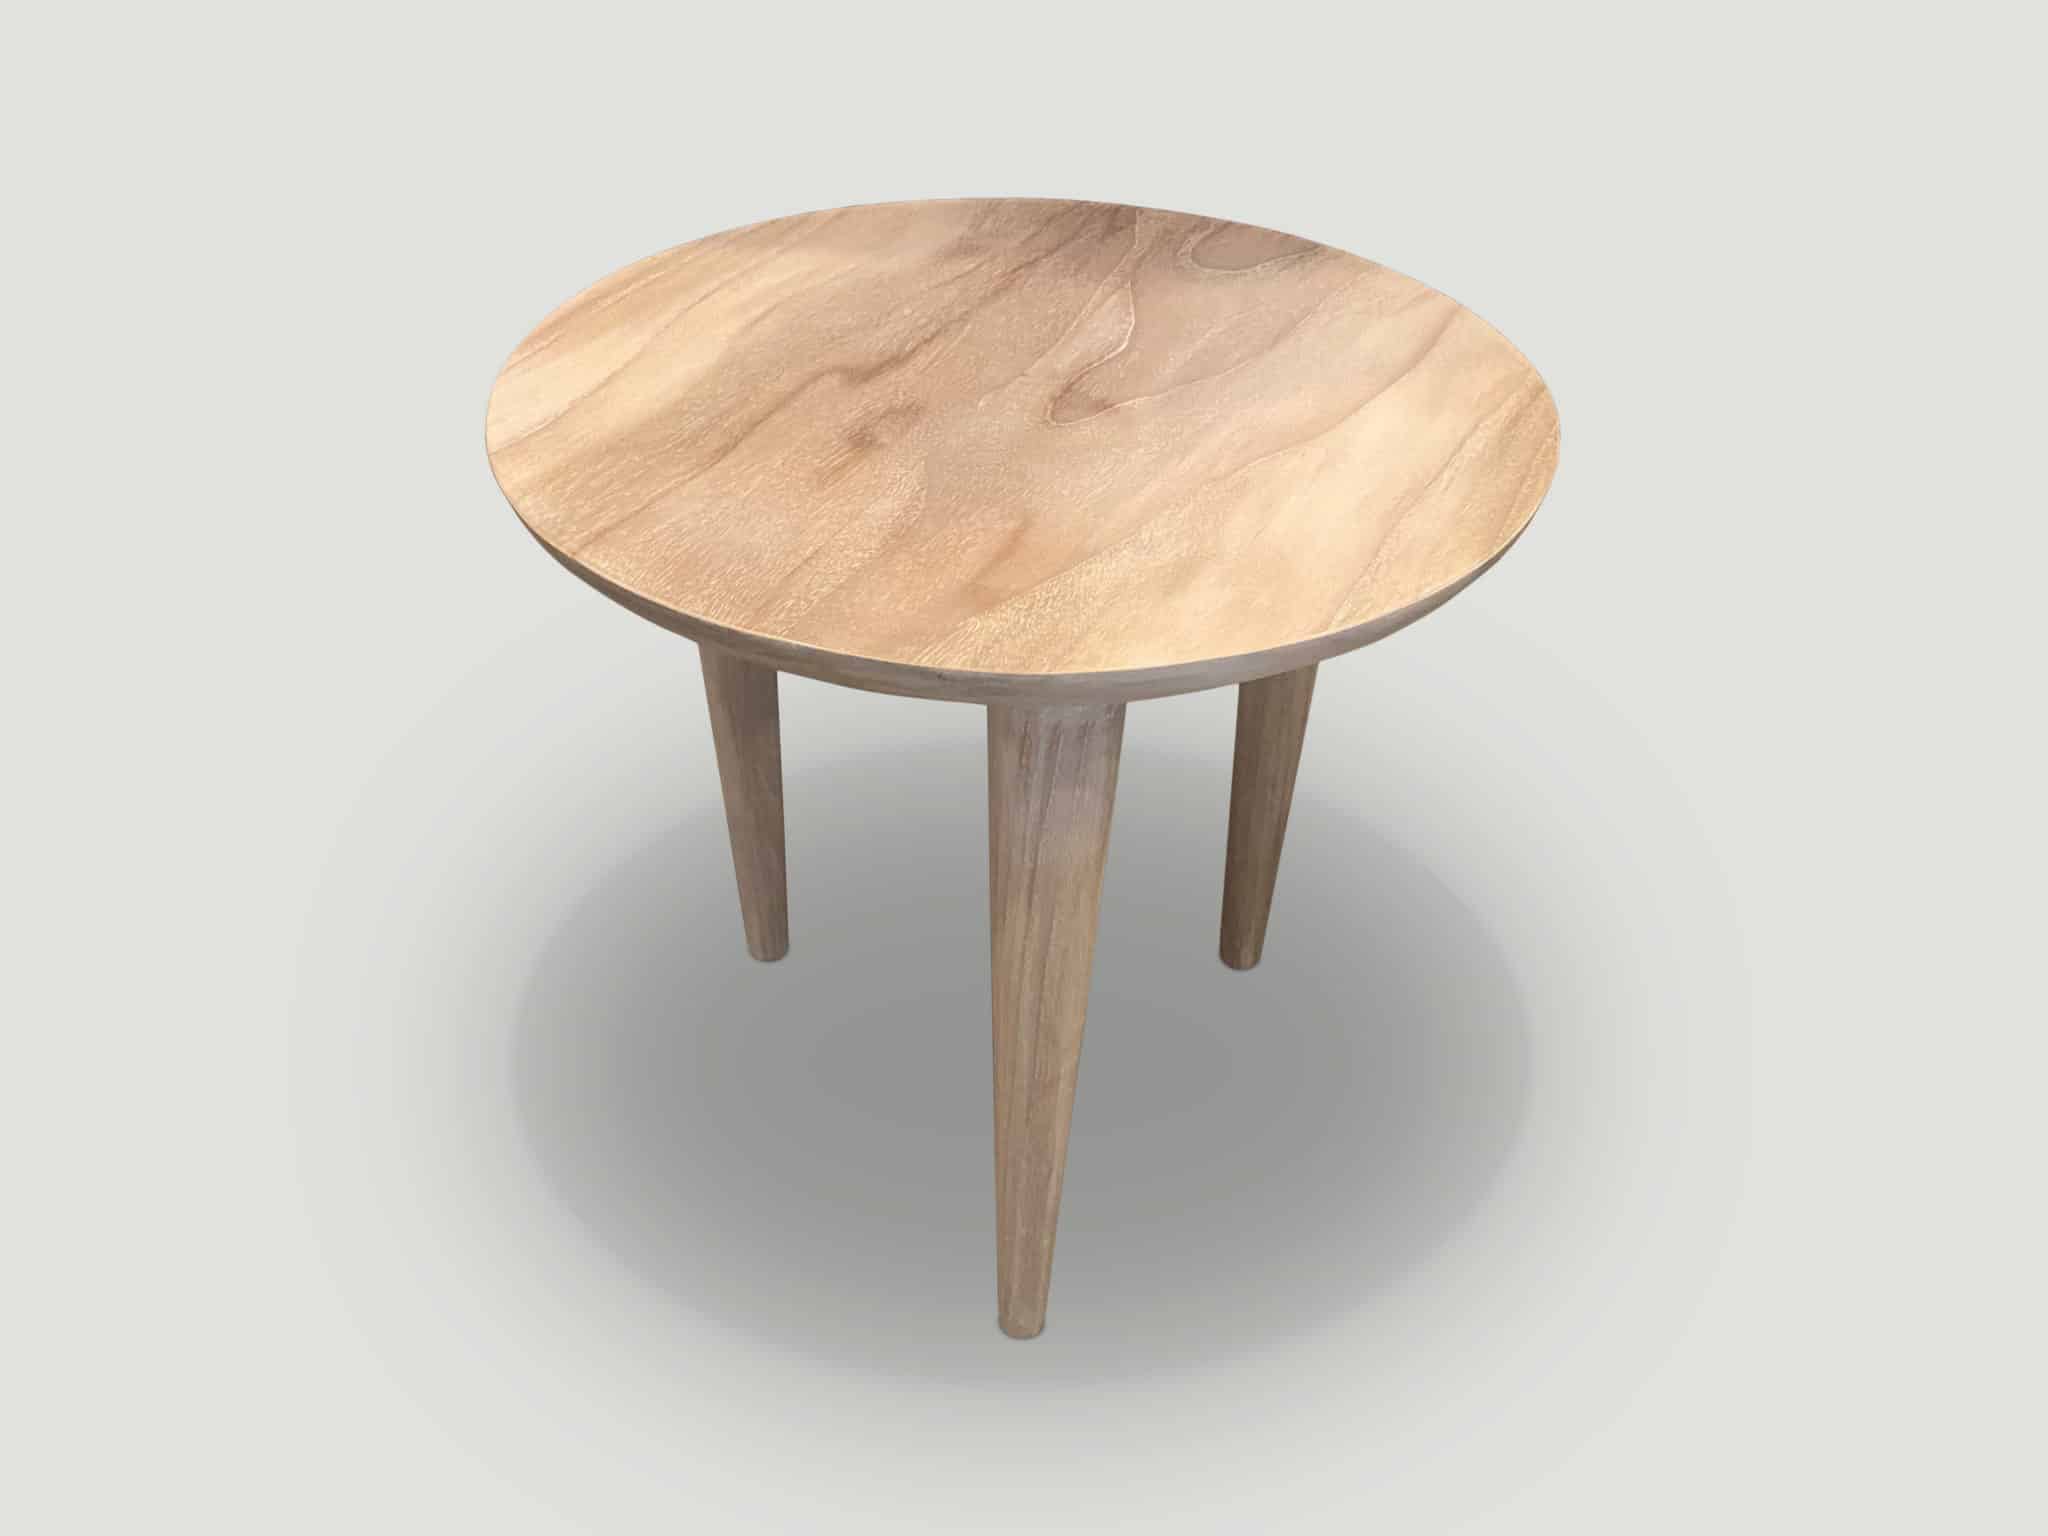 Minimalist white washed teak wood side table with a bevelled top